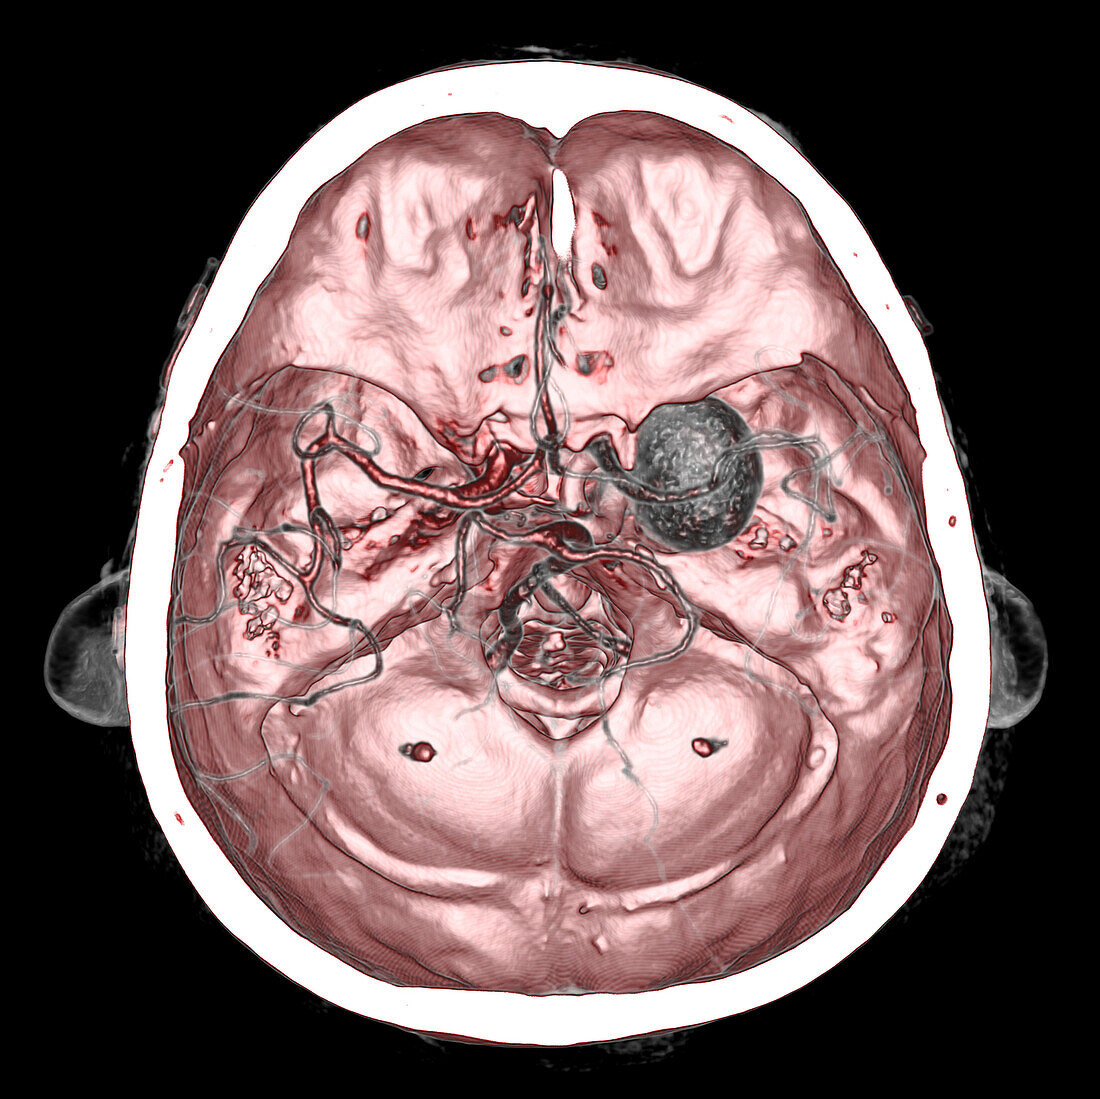 Intracranial aneurysm, CT angiography